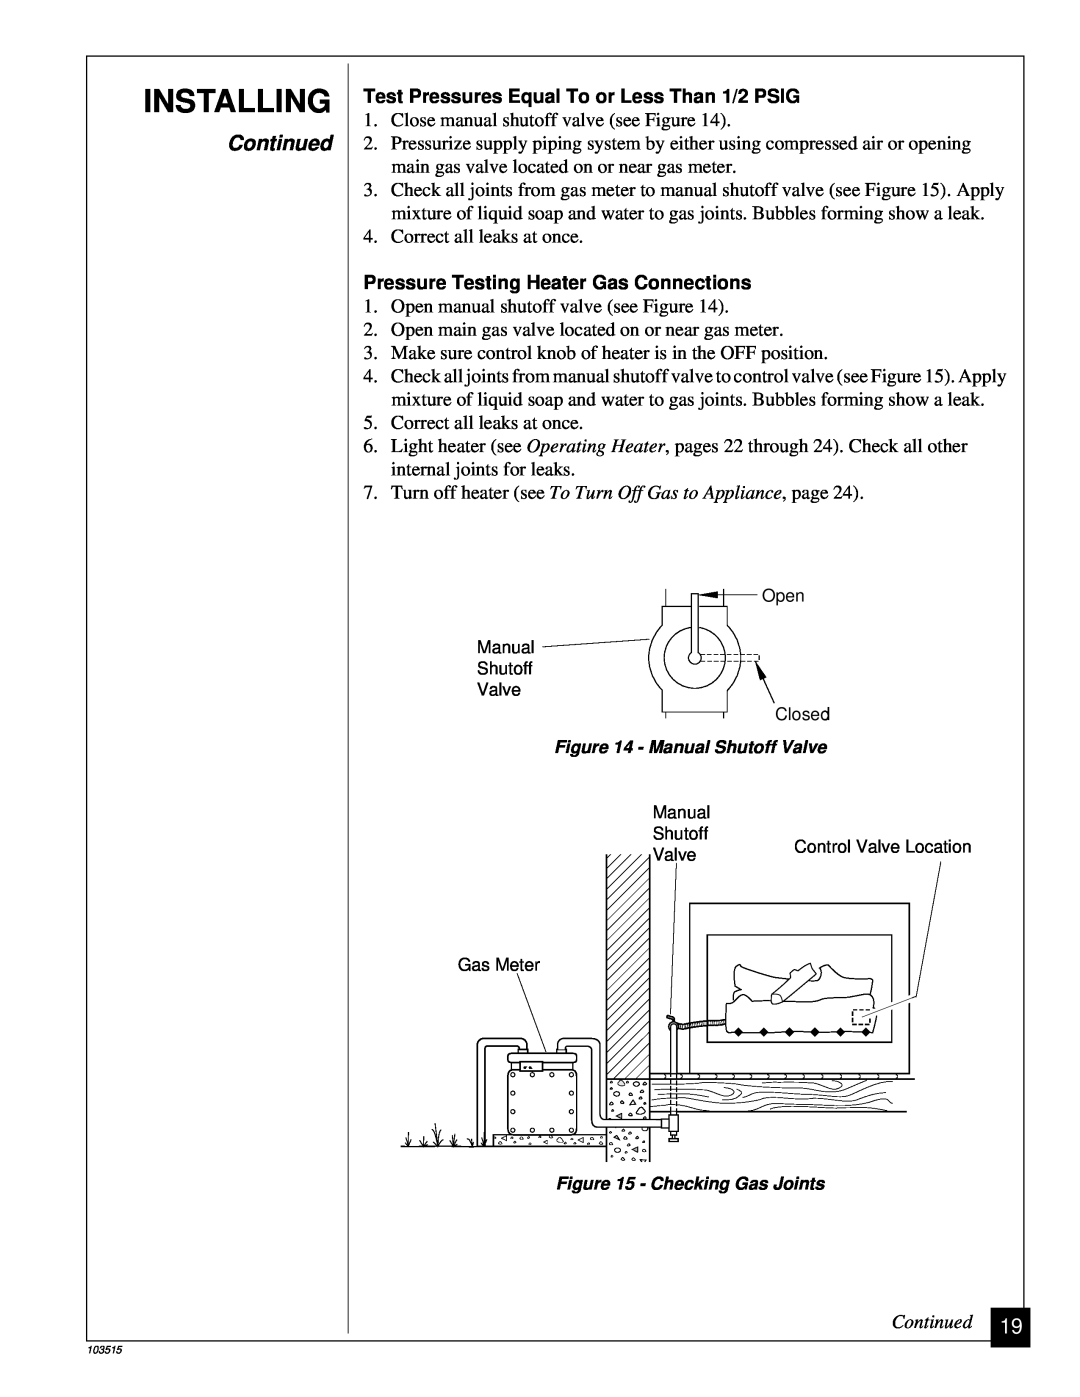 Vanguard Heating Gas Log Heater installation manual Installing, Continued, Test Pressures Equal To or Less Than 1/2 PSIG 